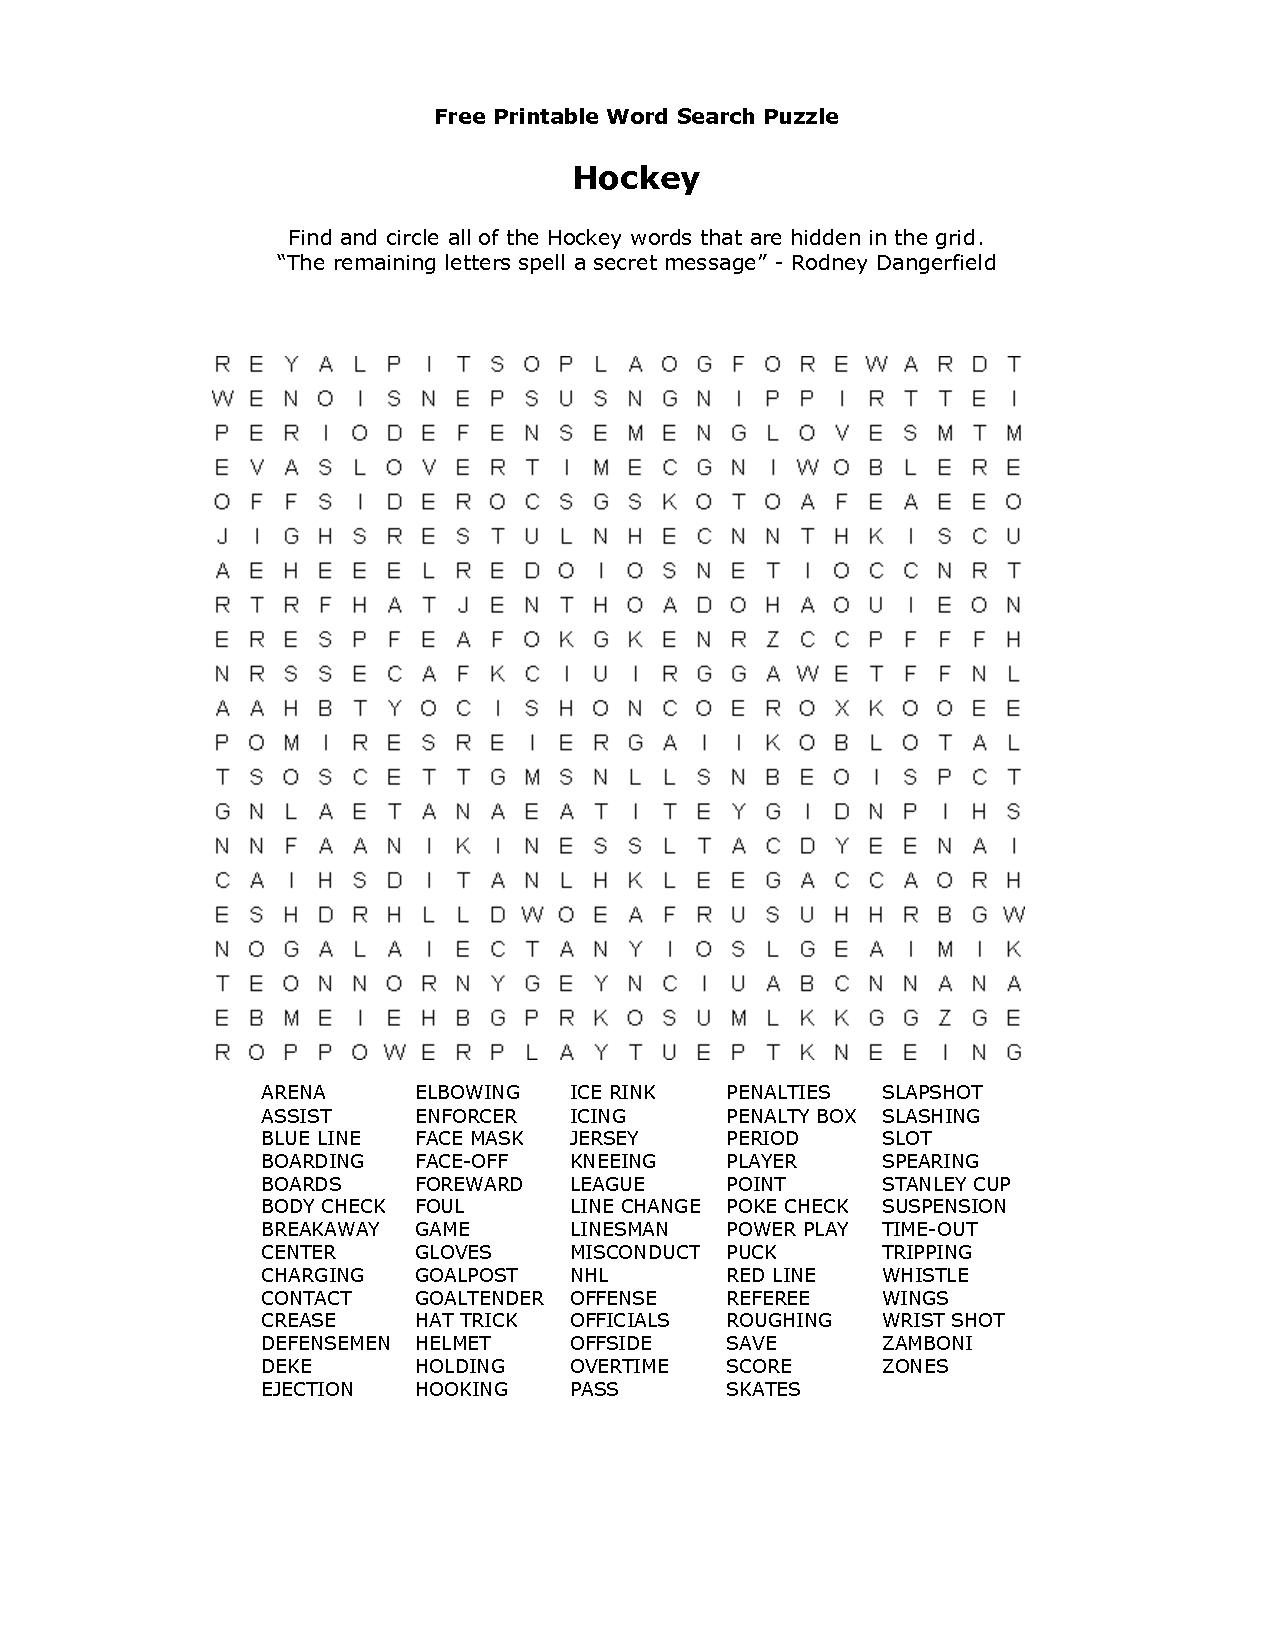 Free Printable Word Searches | Kiddo Shelter - Free Printable Word Searches For Kids